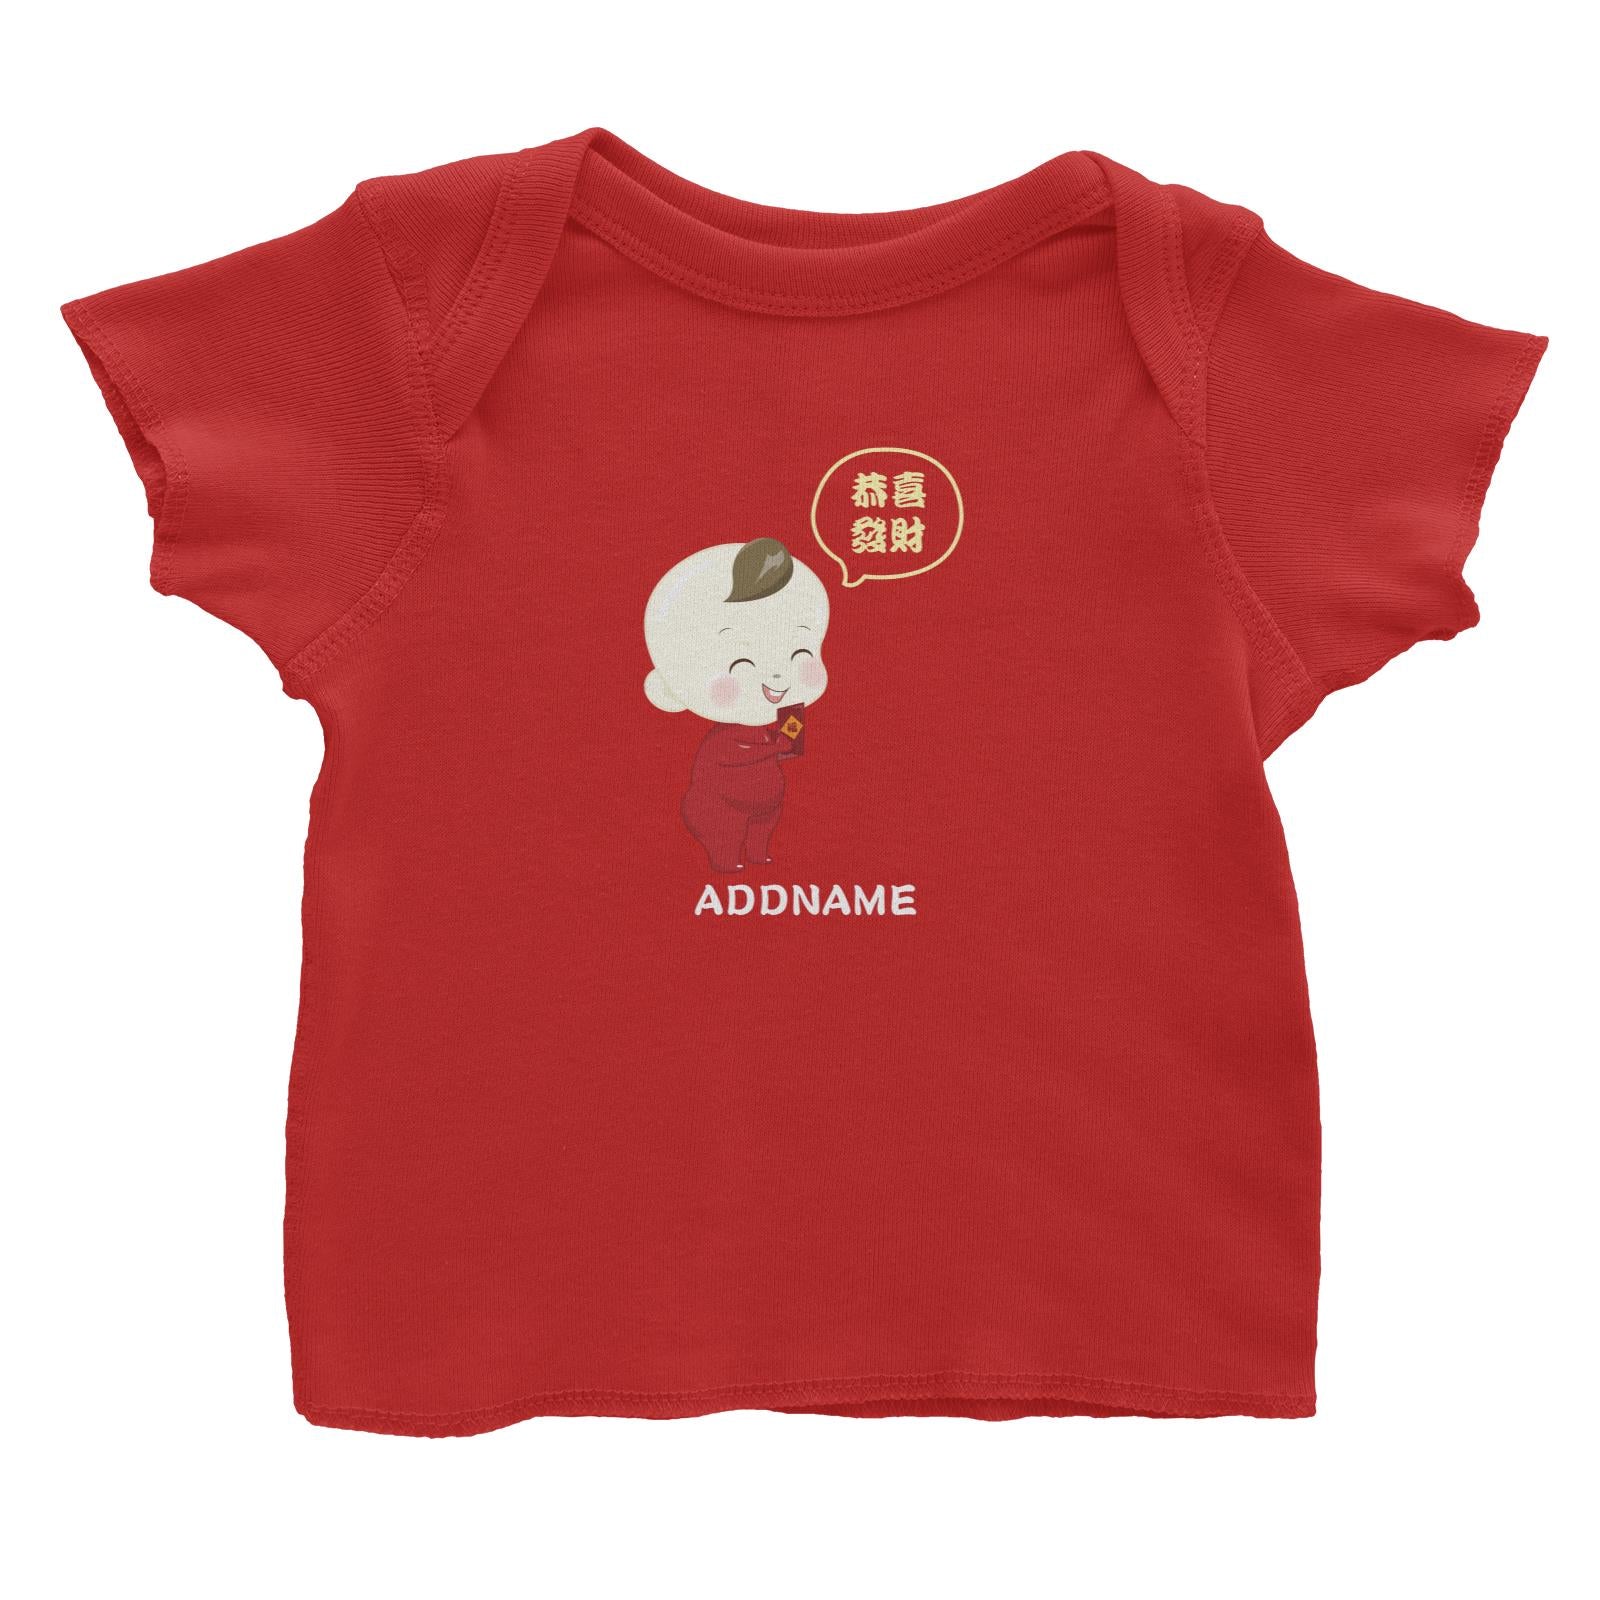 Chinese New Year Family Gong Xi Fai Cai Baby Boy Addname Baby T-Shirt